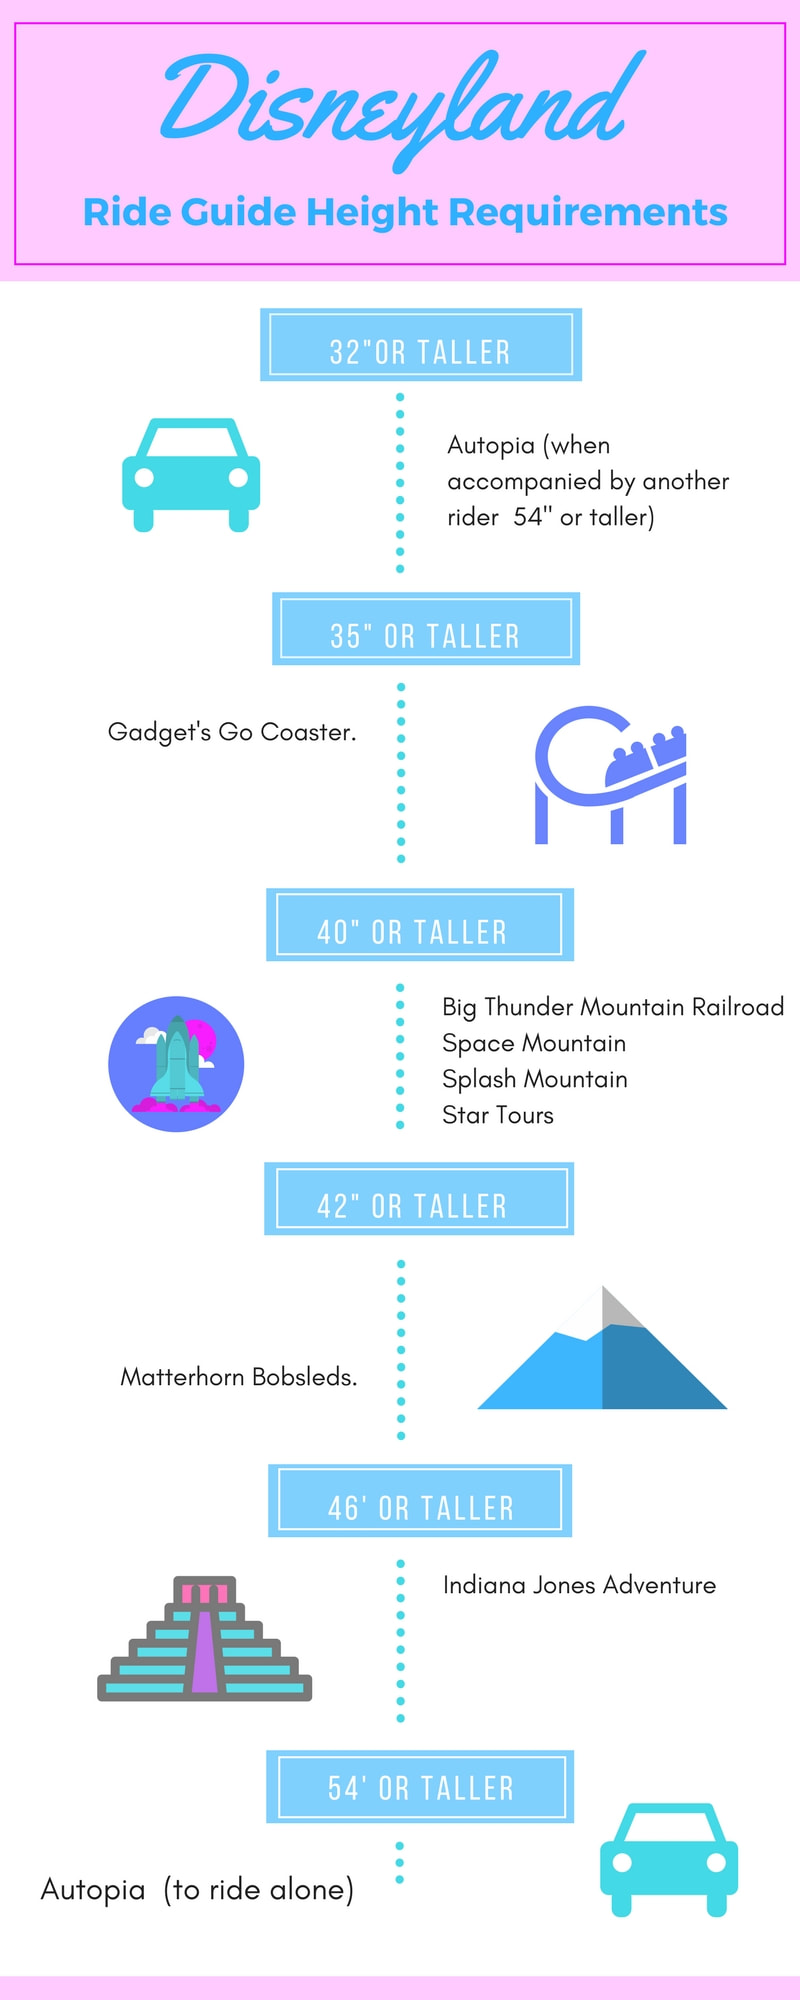 Disneyland Ride Guide Height Requirements